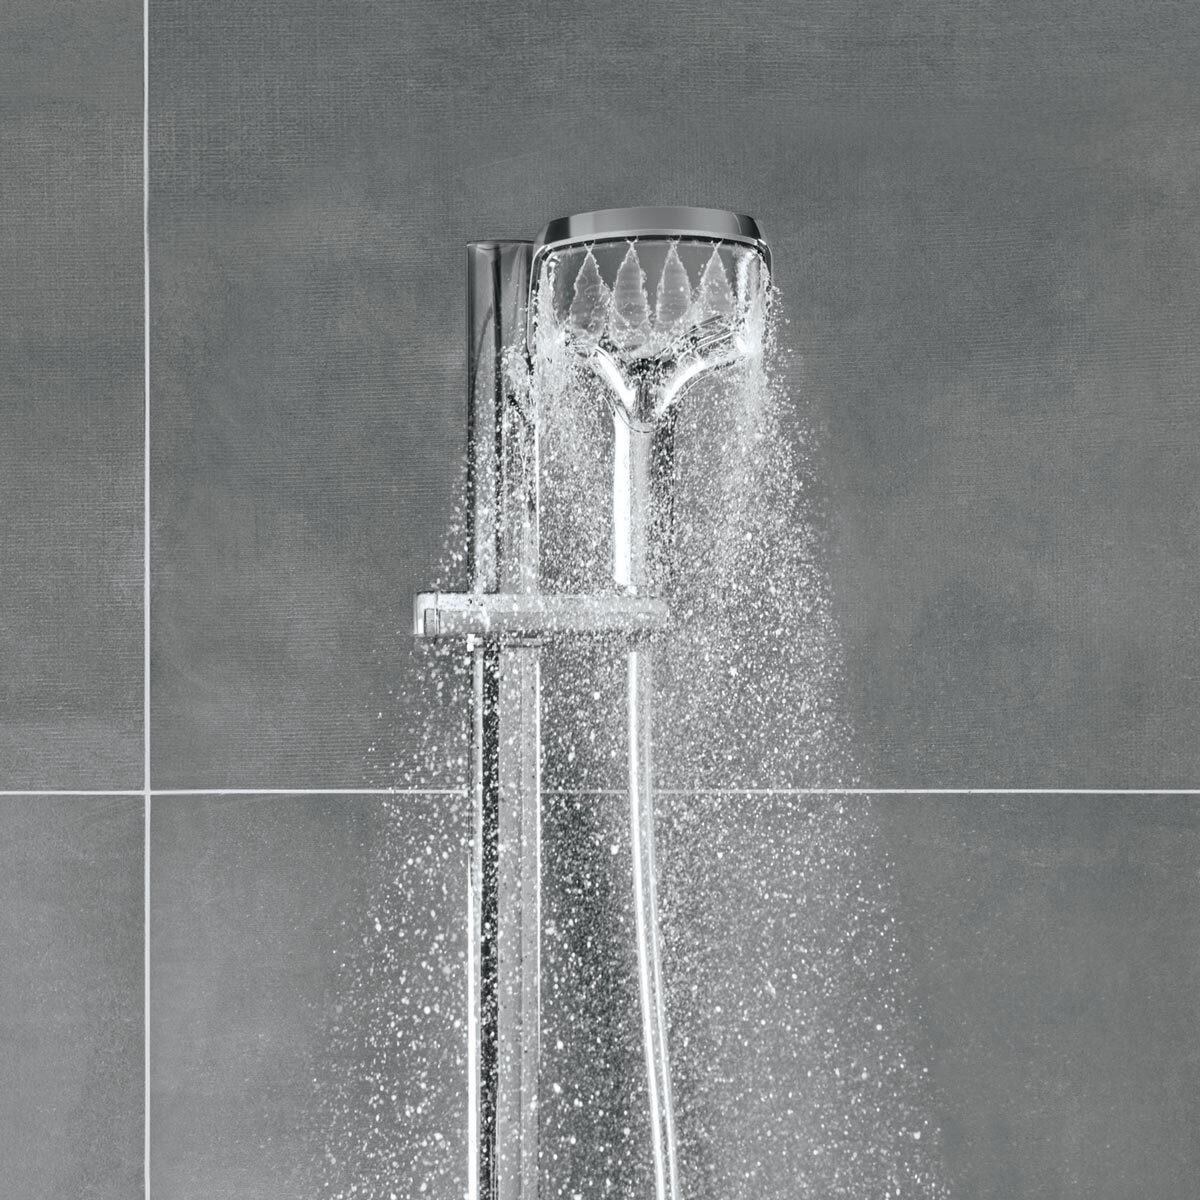 Lifestyle image of Shower head in bathroom setting